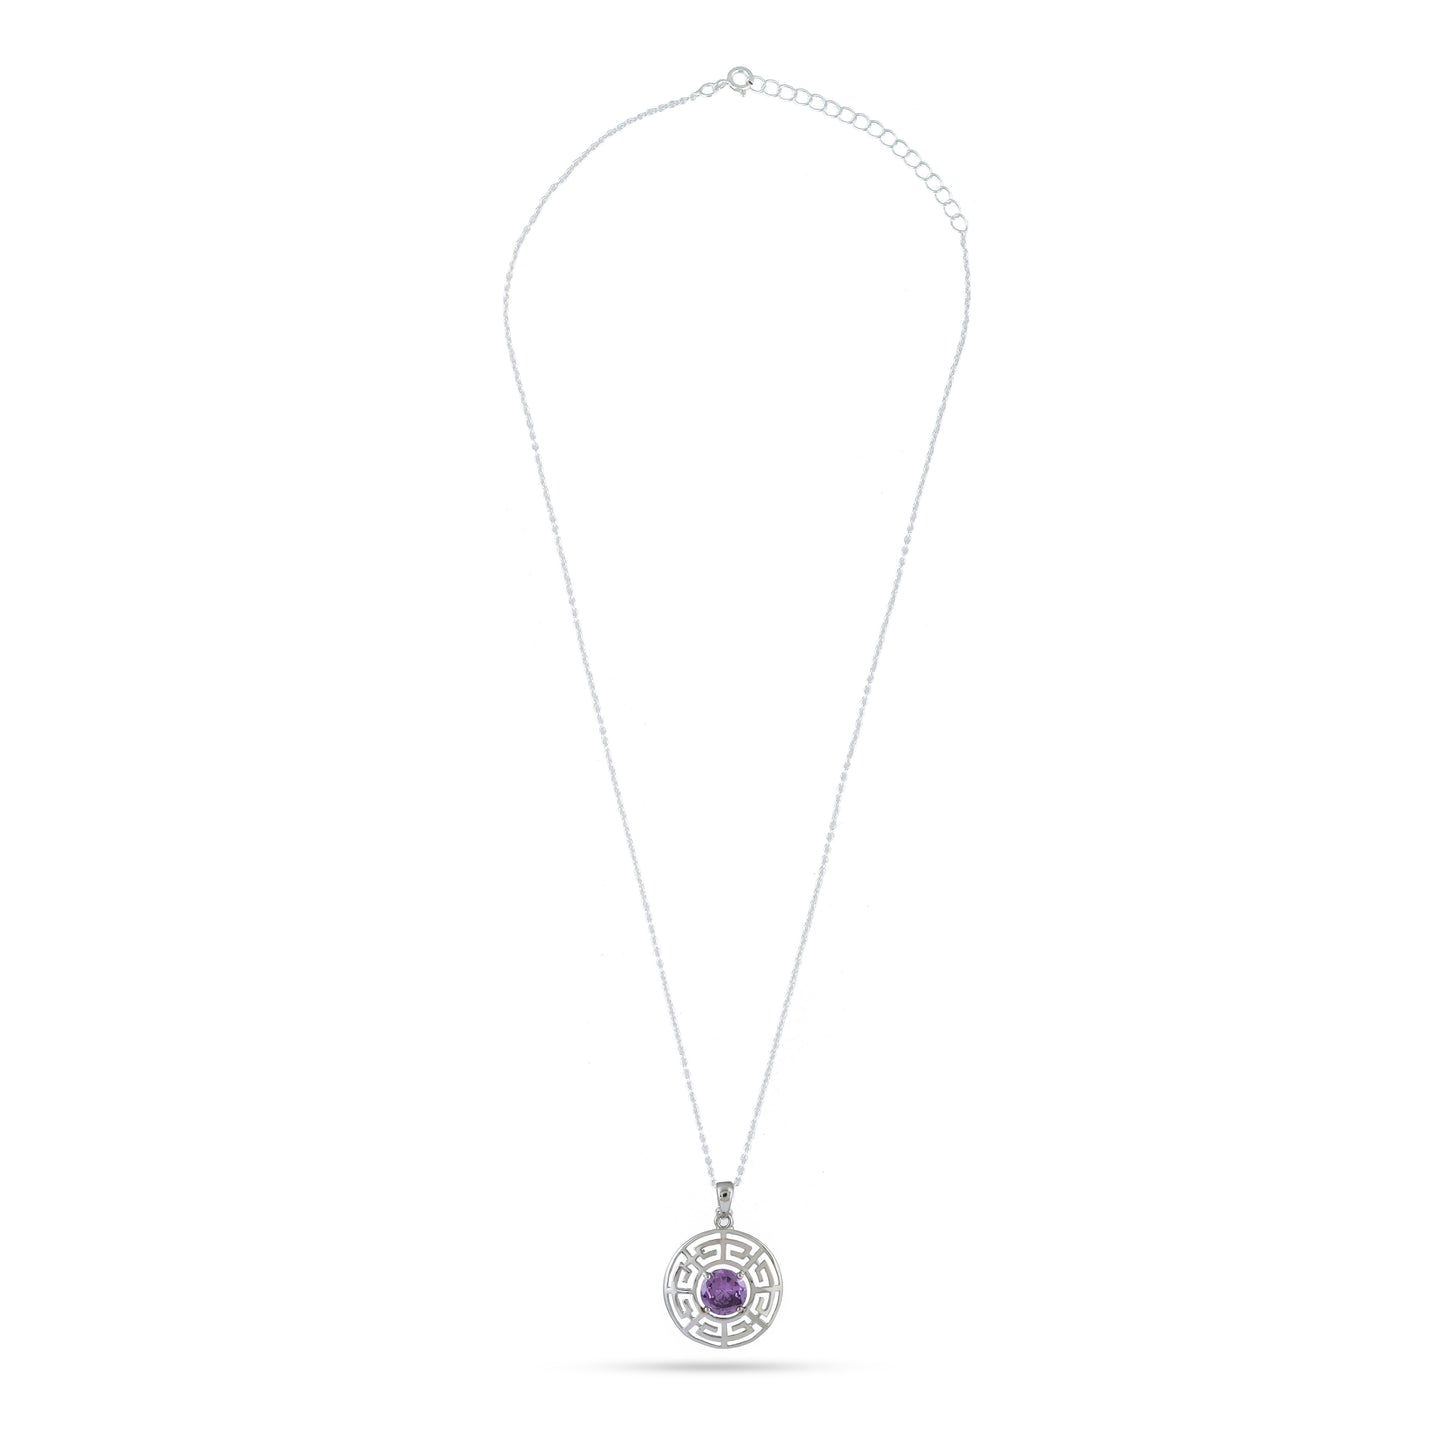 Purple Stone Silver Necklace - From Purl Purl